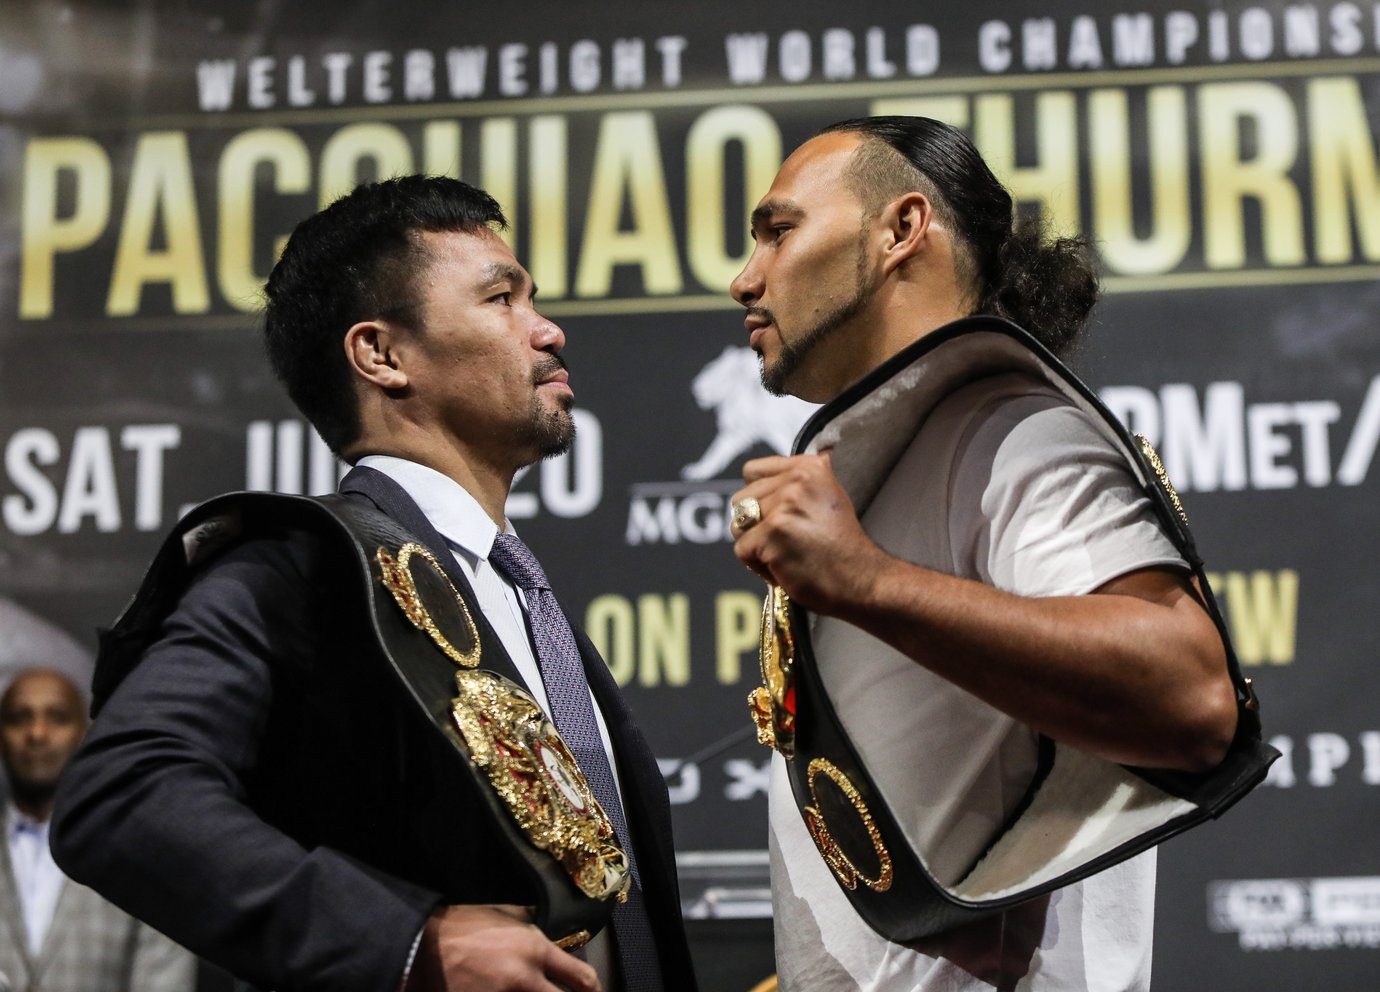 Thurman looks past Pacquiao, says he wants to fight Spence